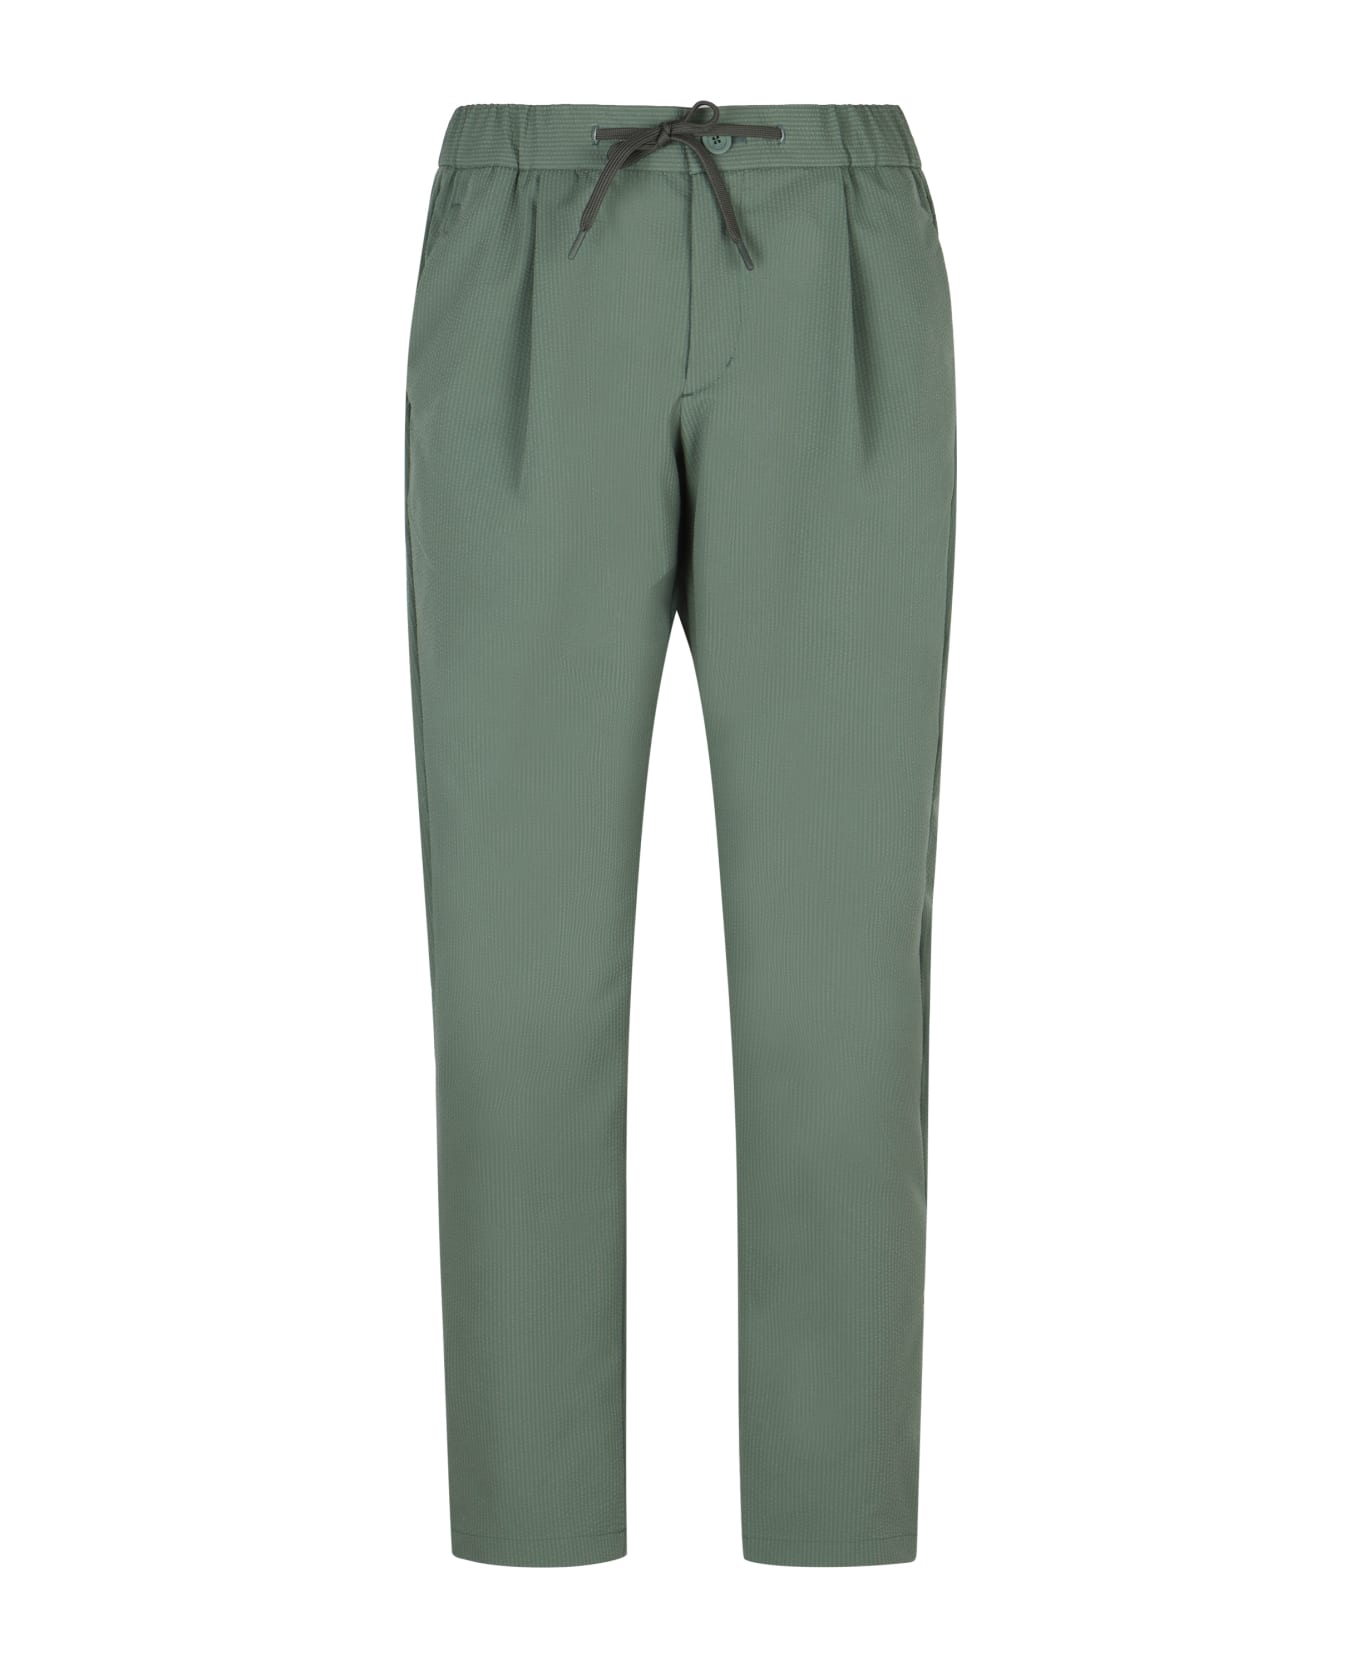 Herno Technical Fabric Pants - green